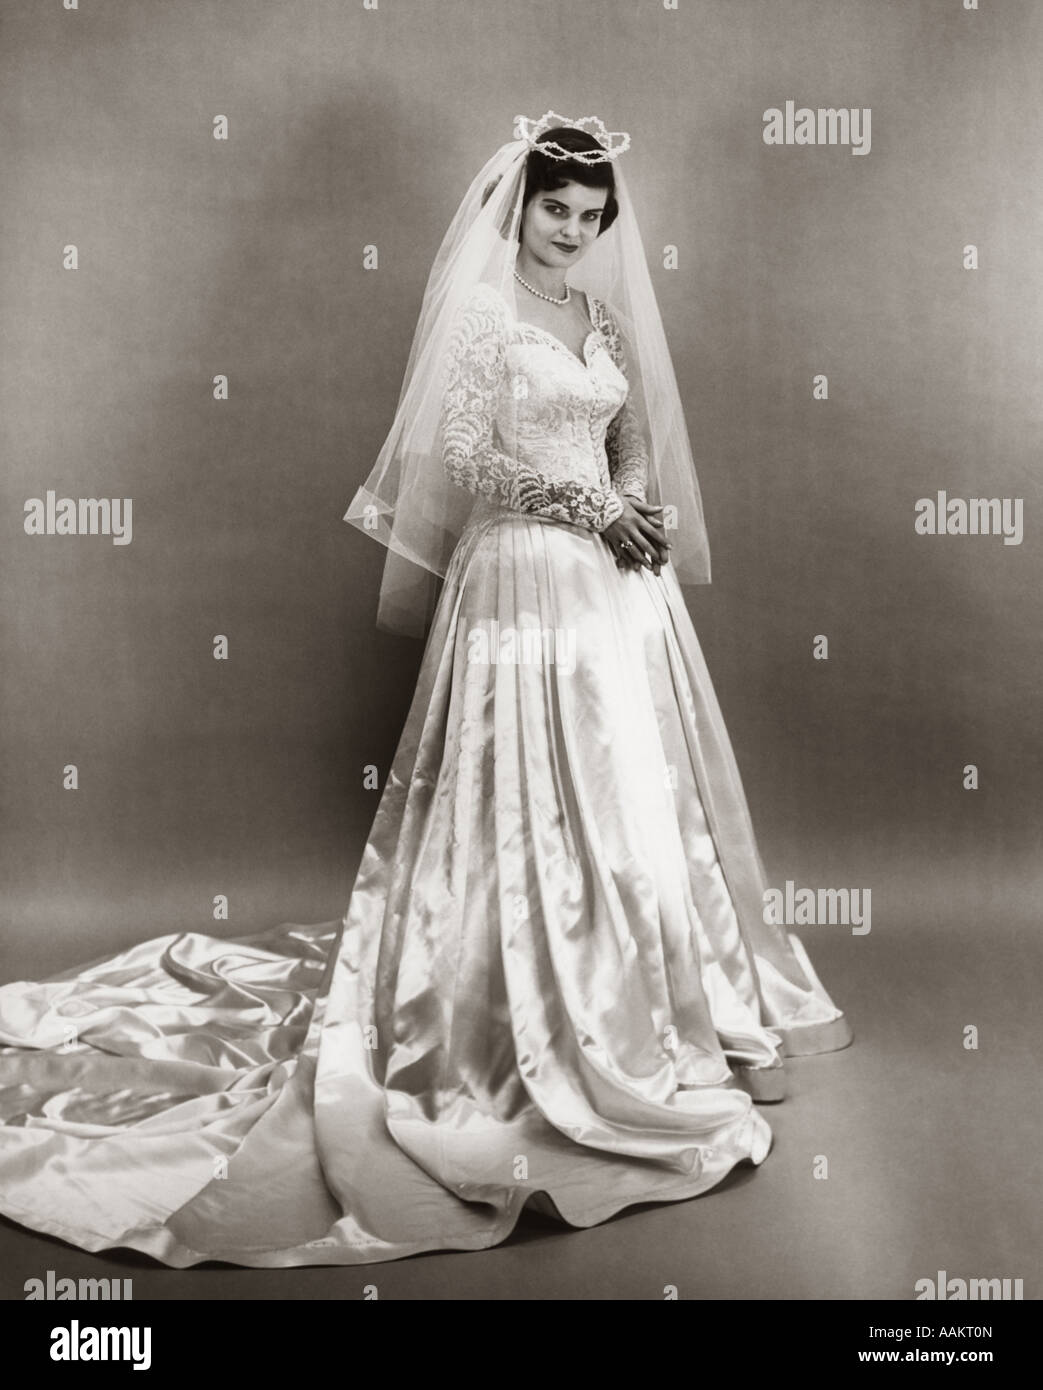 1950s FULL LENGTH PORTRAIT BRIDE STANDING WEARING SATIN AND LACE WEDDING GOWN VEIL AND TIARA LOOKING AT CAMERA Stock Photo